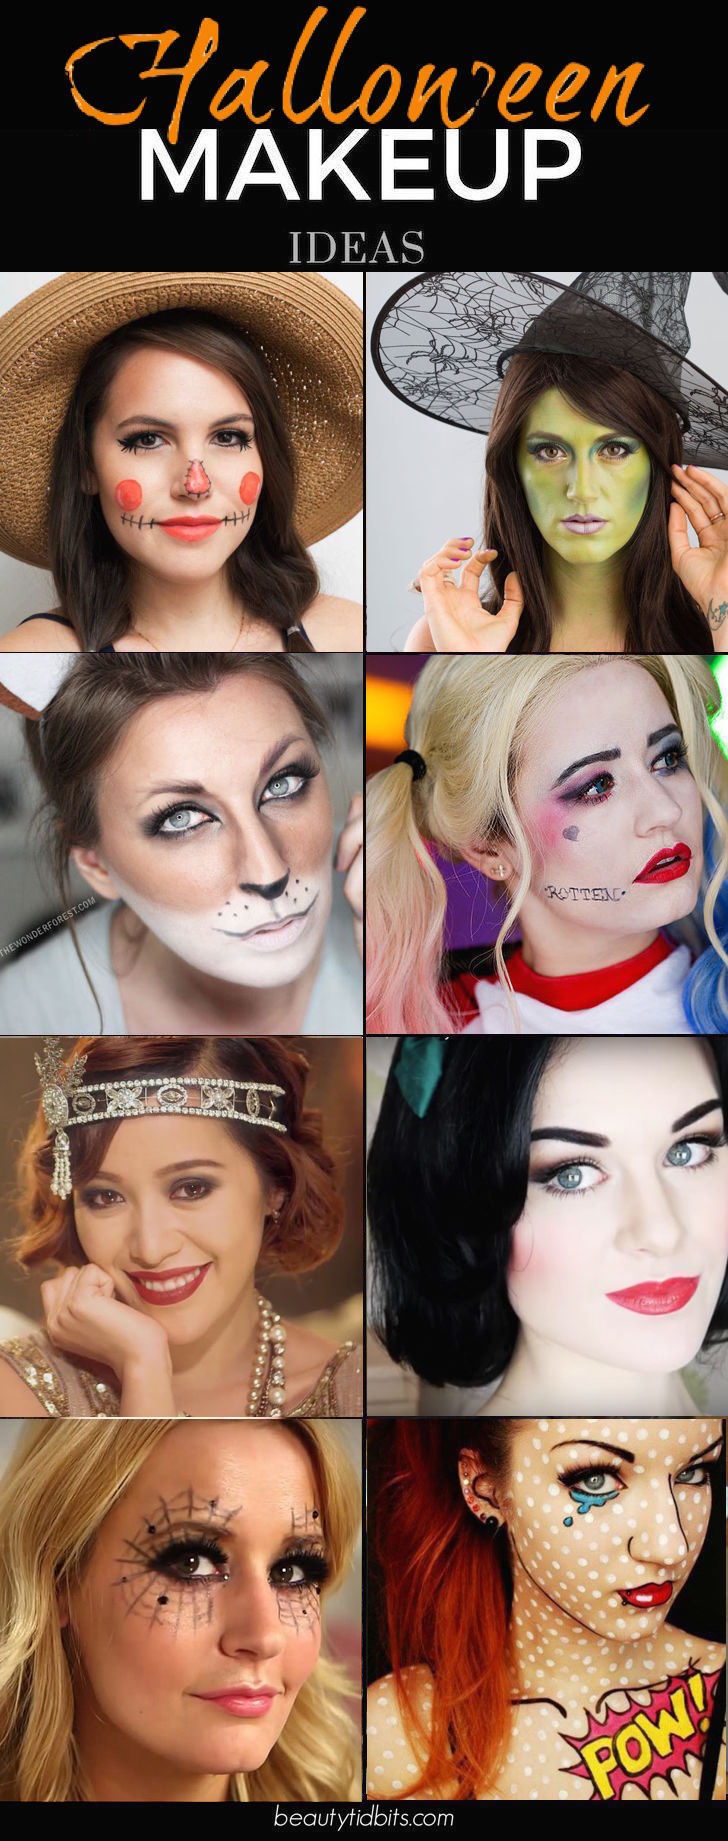 Looking for an easy Halloween makeup idea? Check out these makeup looks which can be done with products you already have!